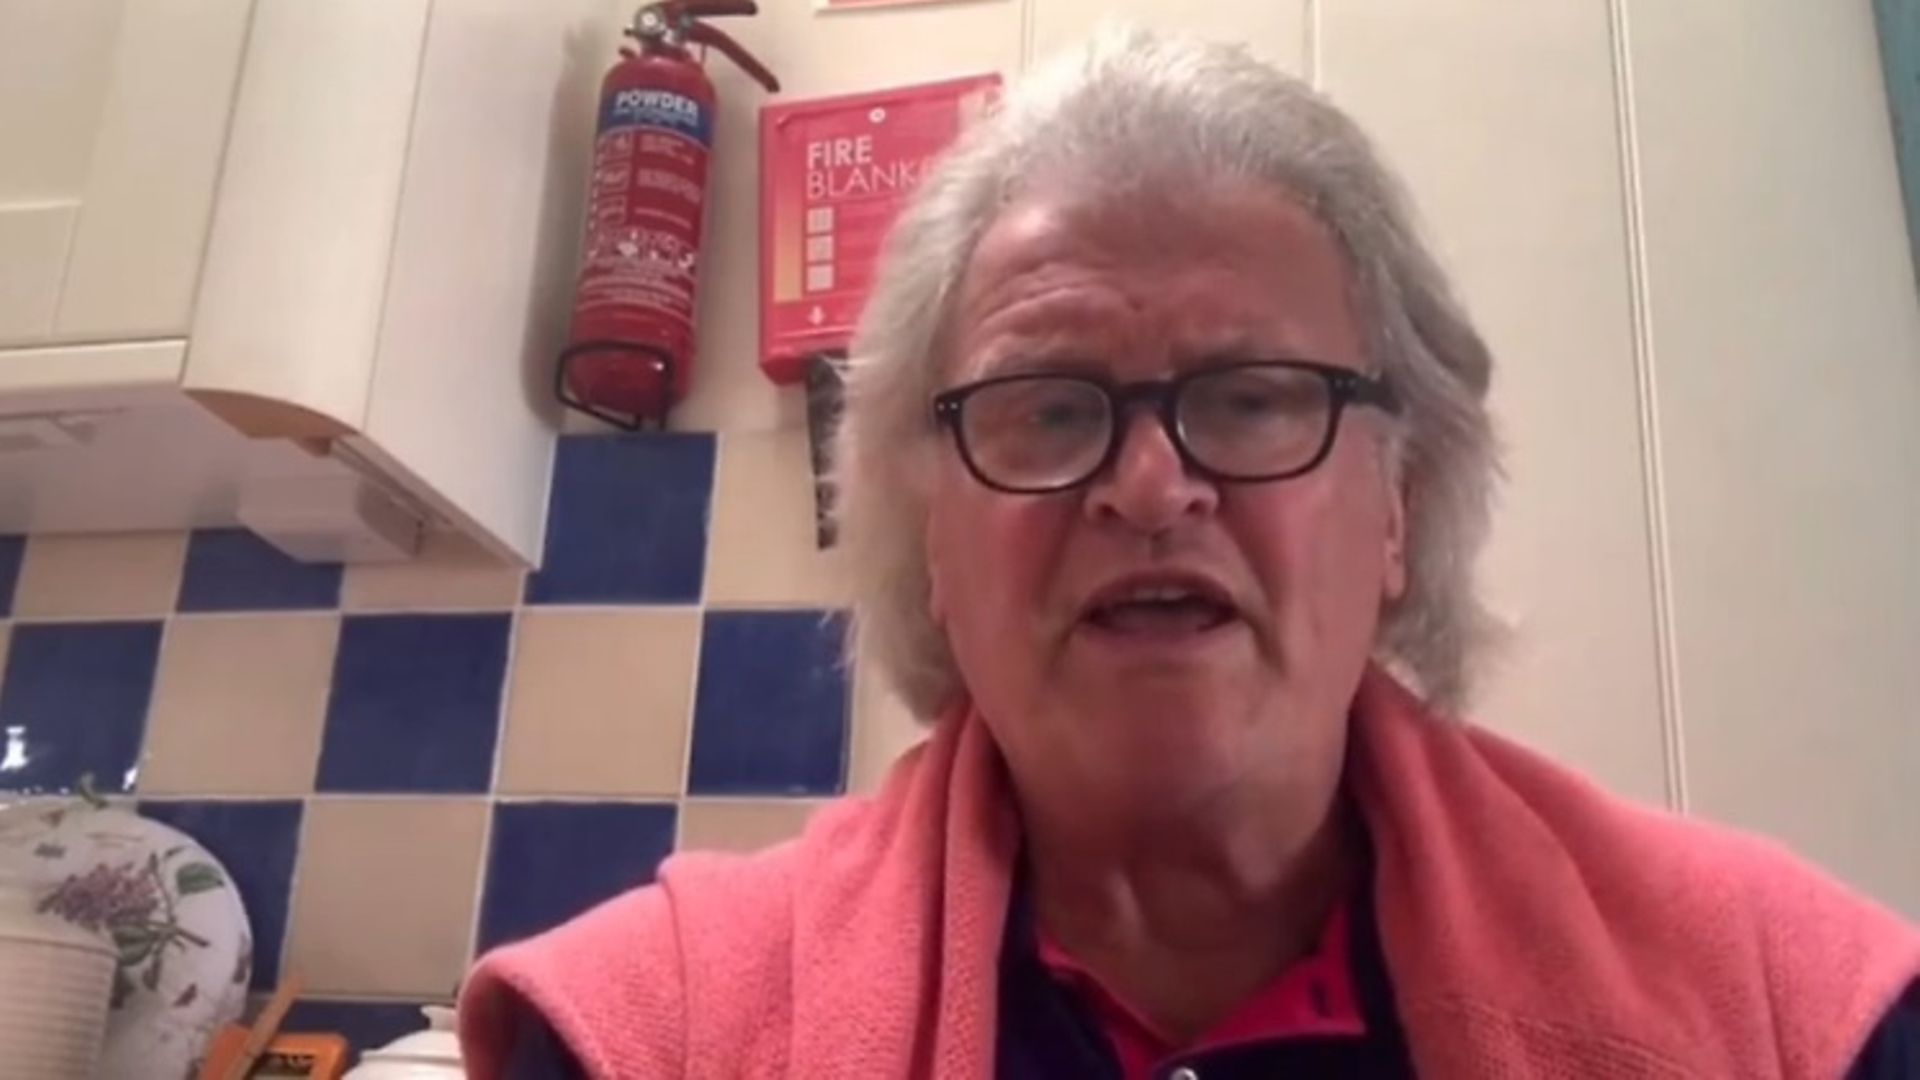 Wetherspoon boss Tim Martin appears on Ian King Live. - Credit: Sky News